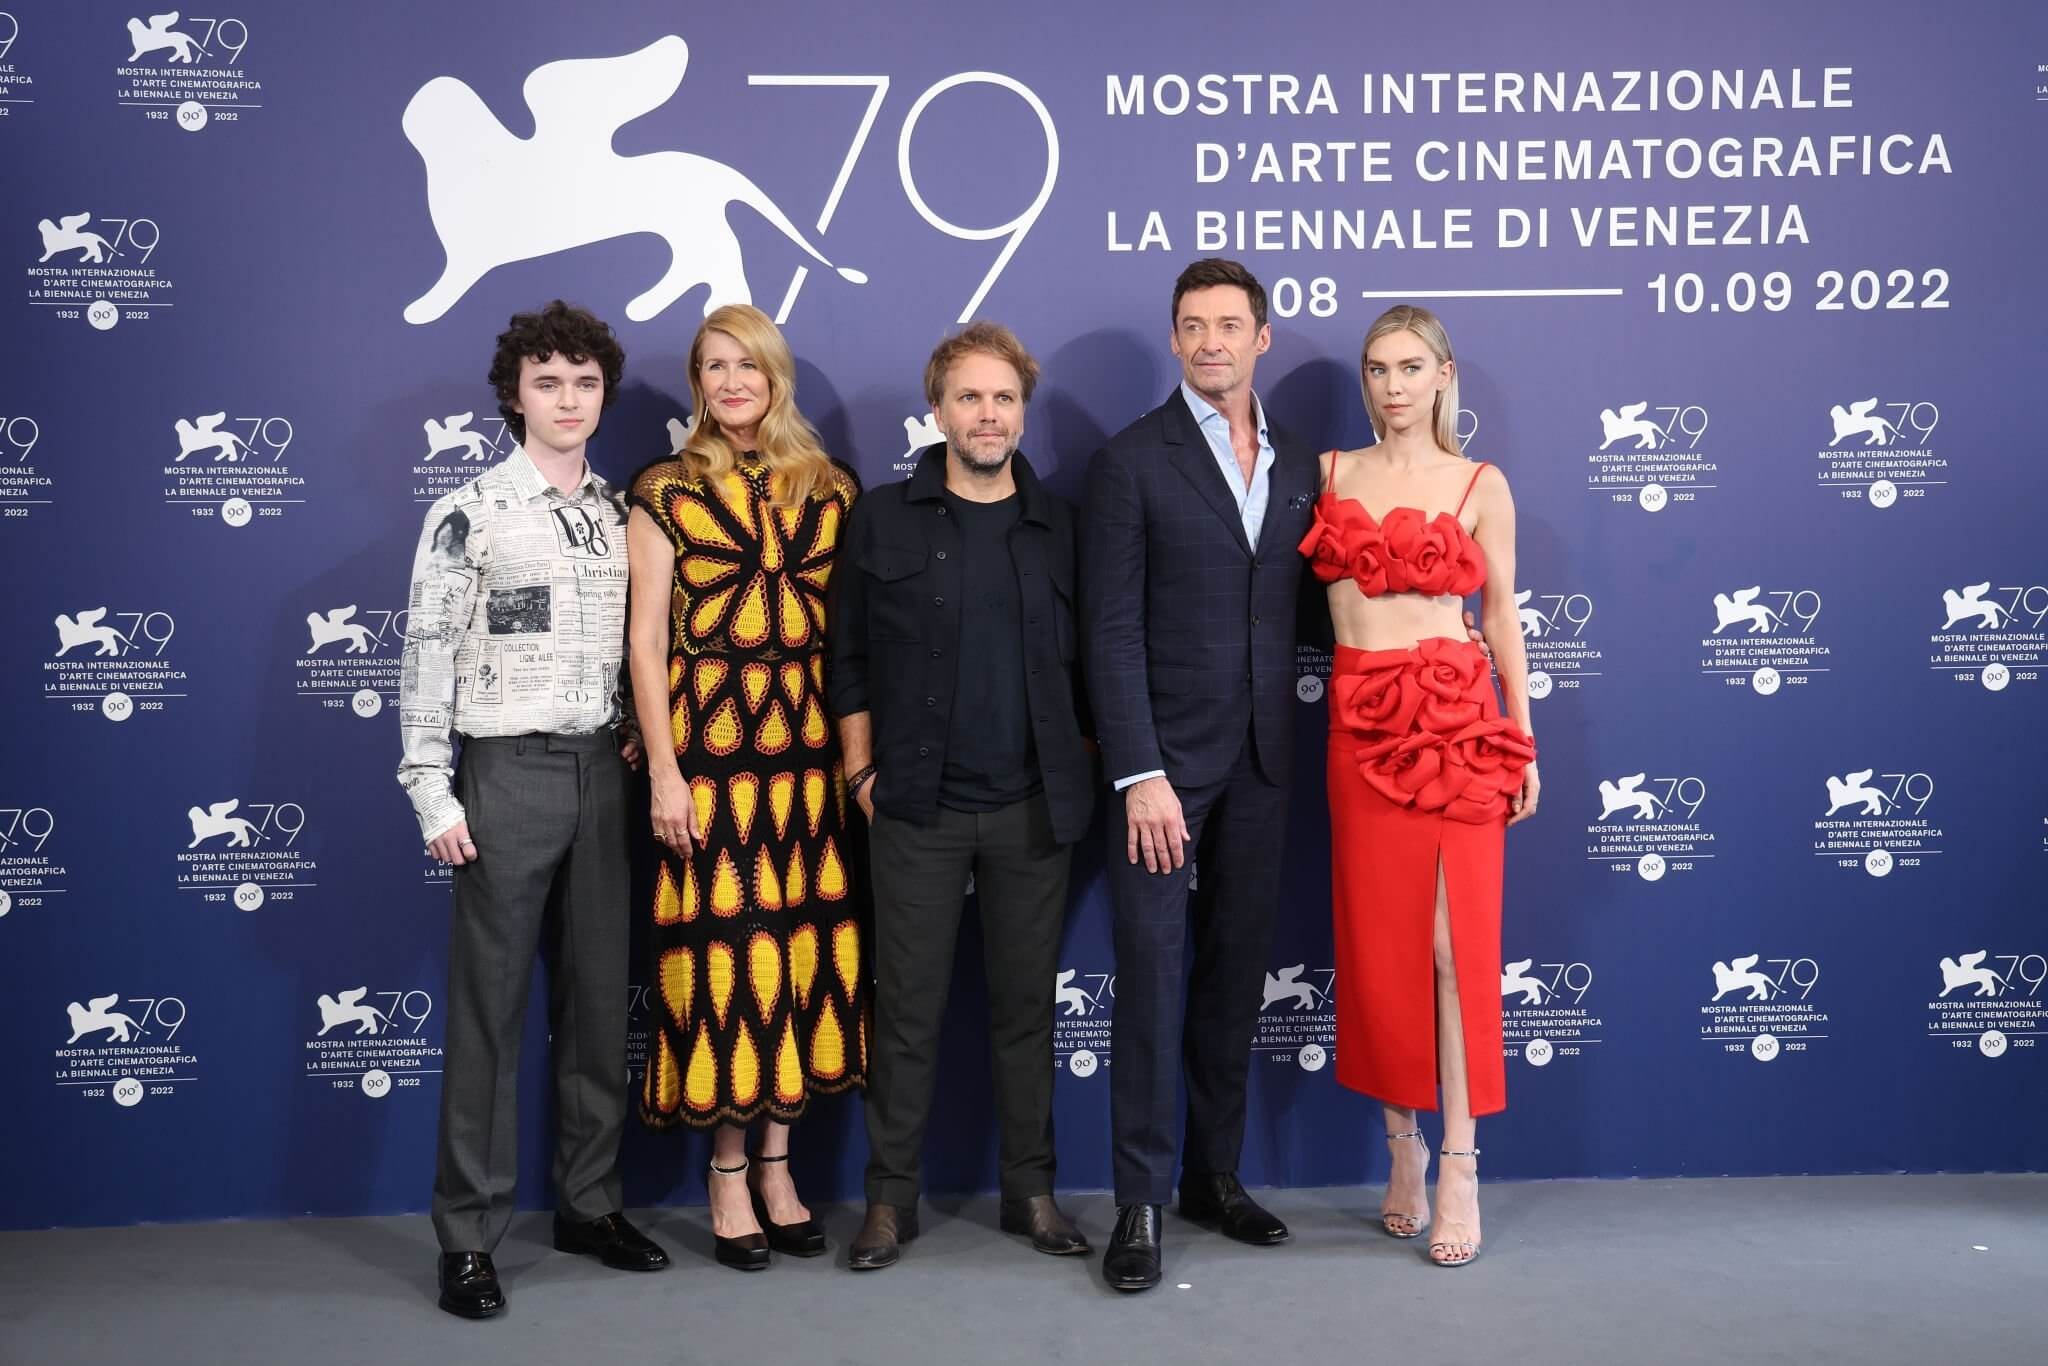 (L-R) Zen McGrath, Laura Dern, director Florian Zeller, Hugh Jackman and Vanessa Kirby attend the photocall for "The Son" at the 79th Venice International Film Festival on September 07, 2022 in Venice, Italy.